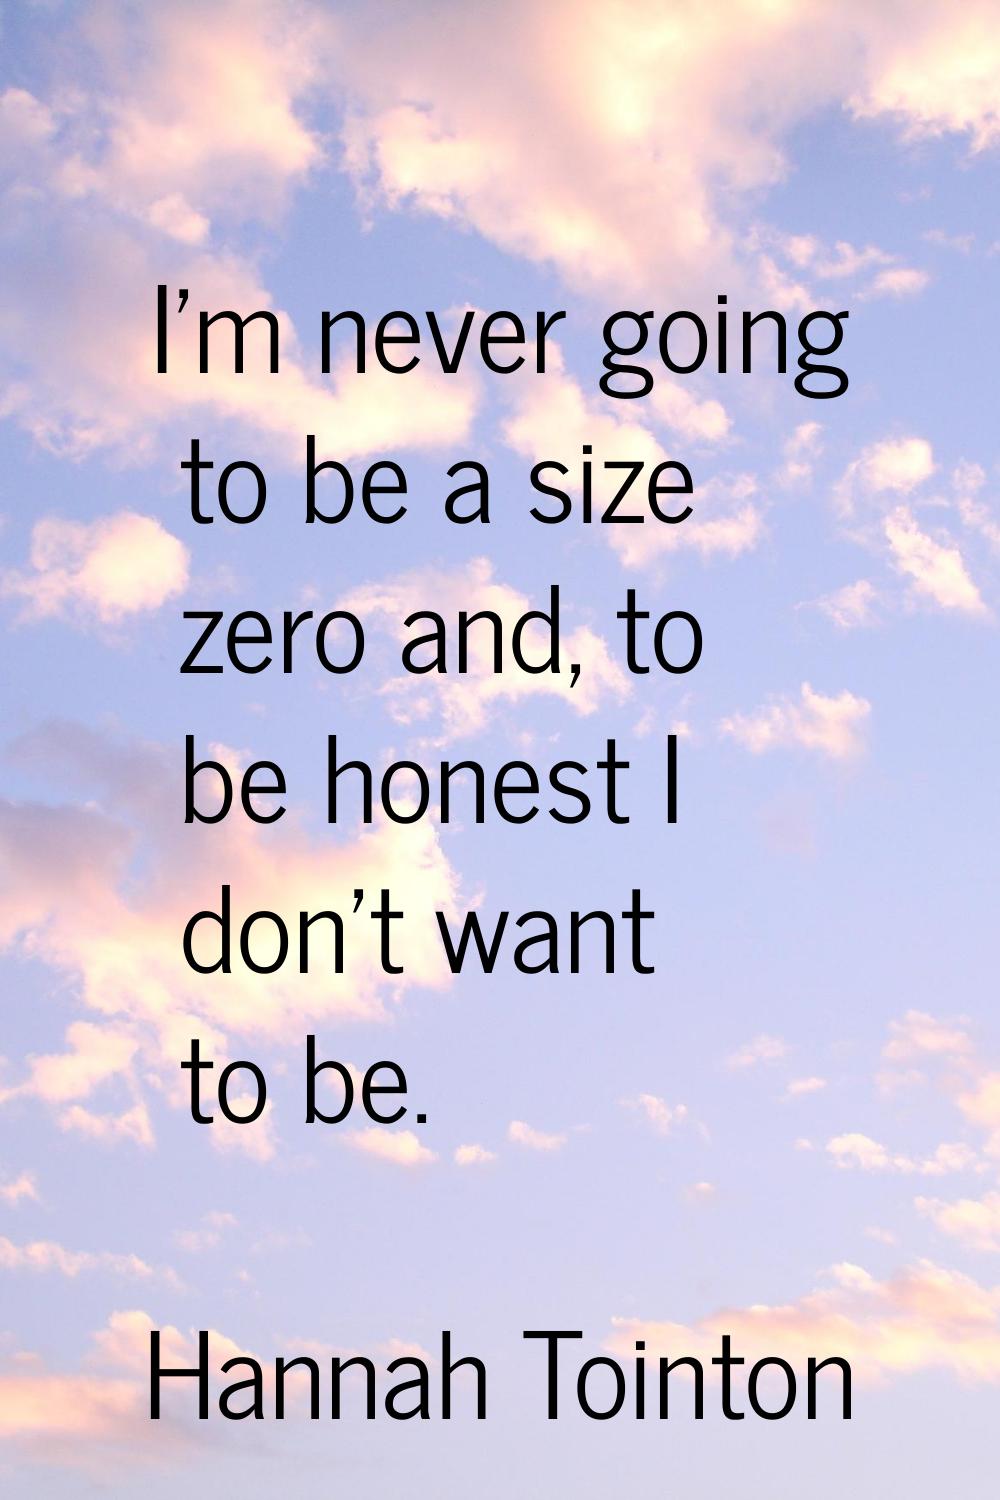 I'm never going to be a size zero and, to be honest I don't want to be.